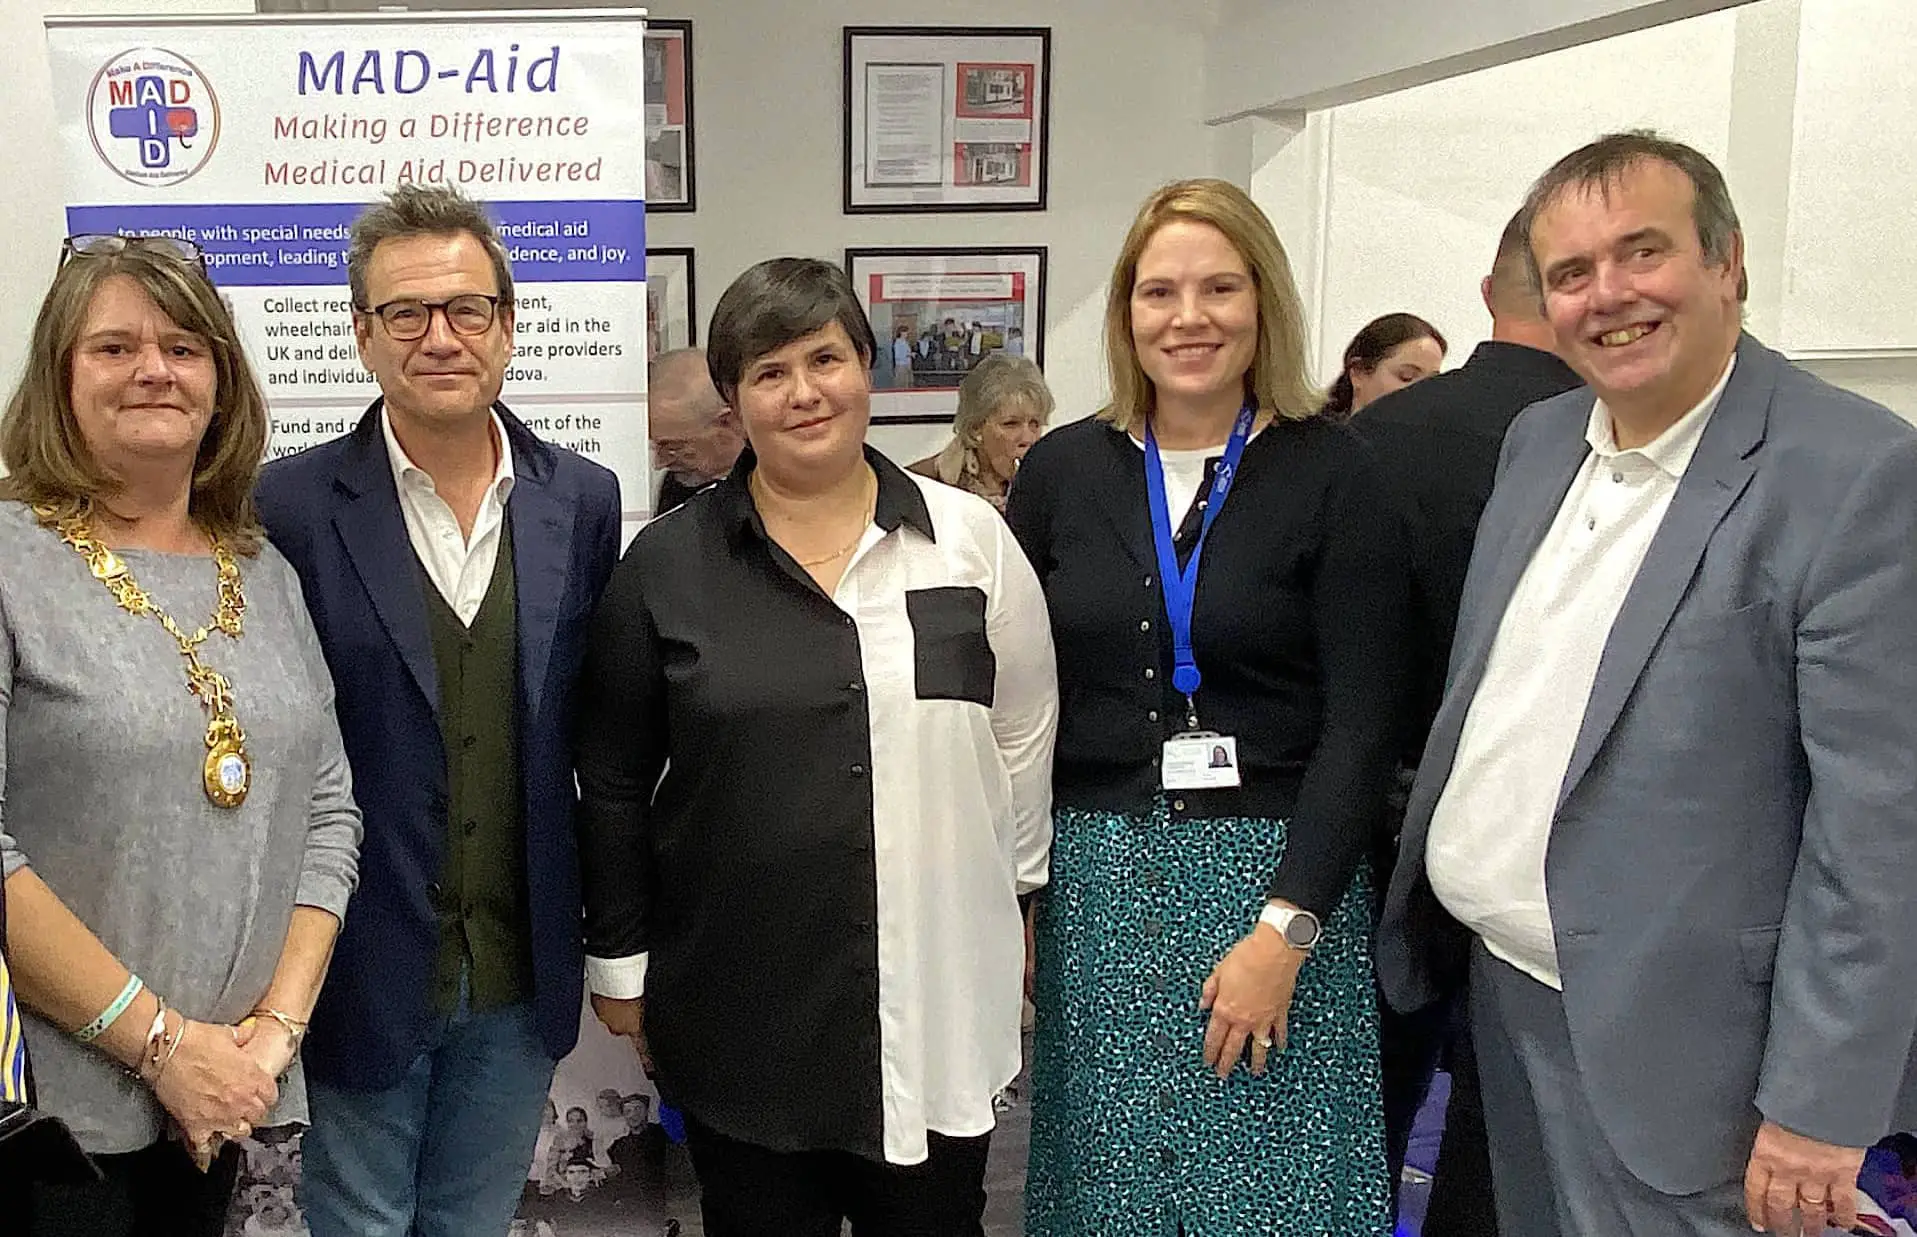 L-R: Tracy Reardon (ECTC Mayor) MP Bob Seely, Victoria Dunford (Founder MAD-Aid), Claire Elderfield (Project Manager) and Chris Ashman, Director for Regeneration, IWC